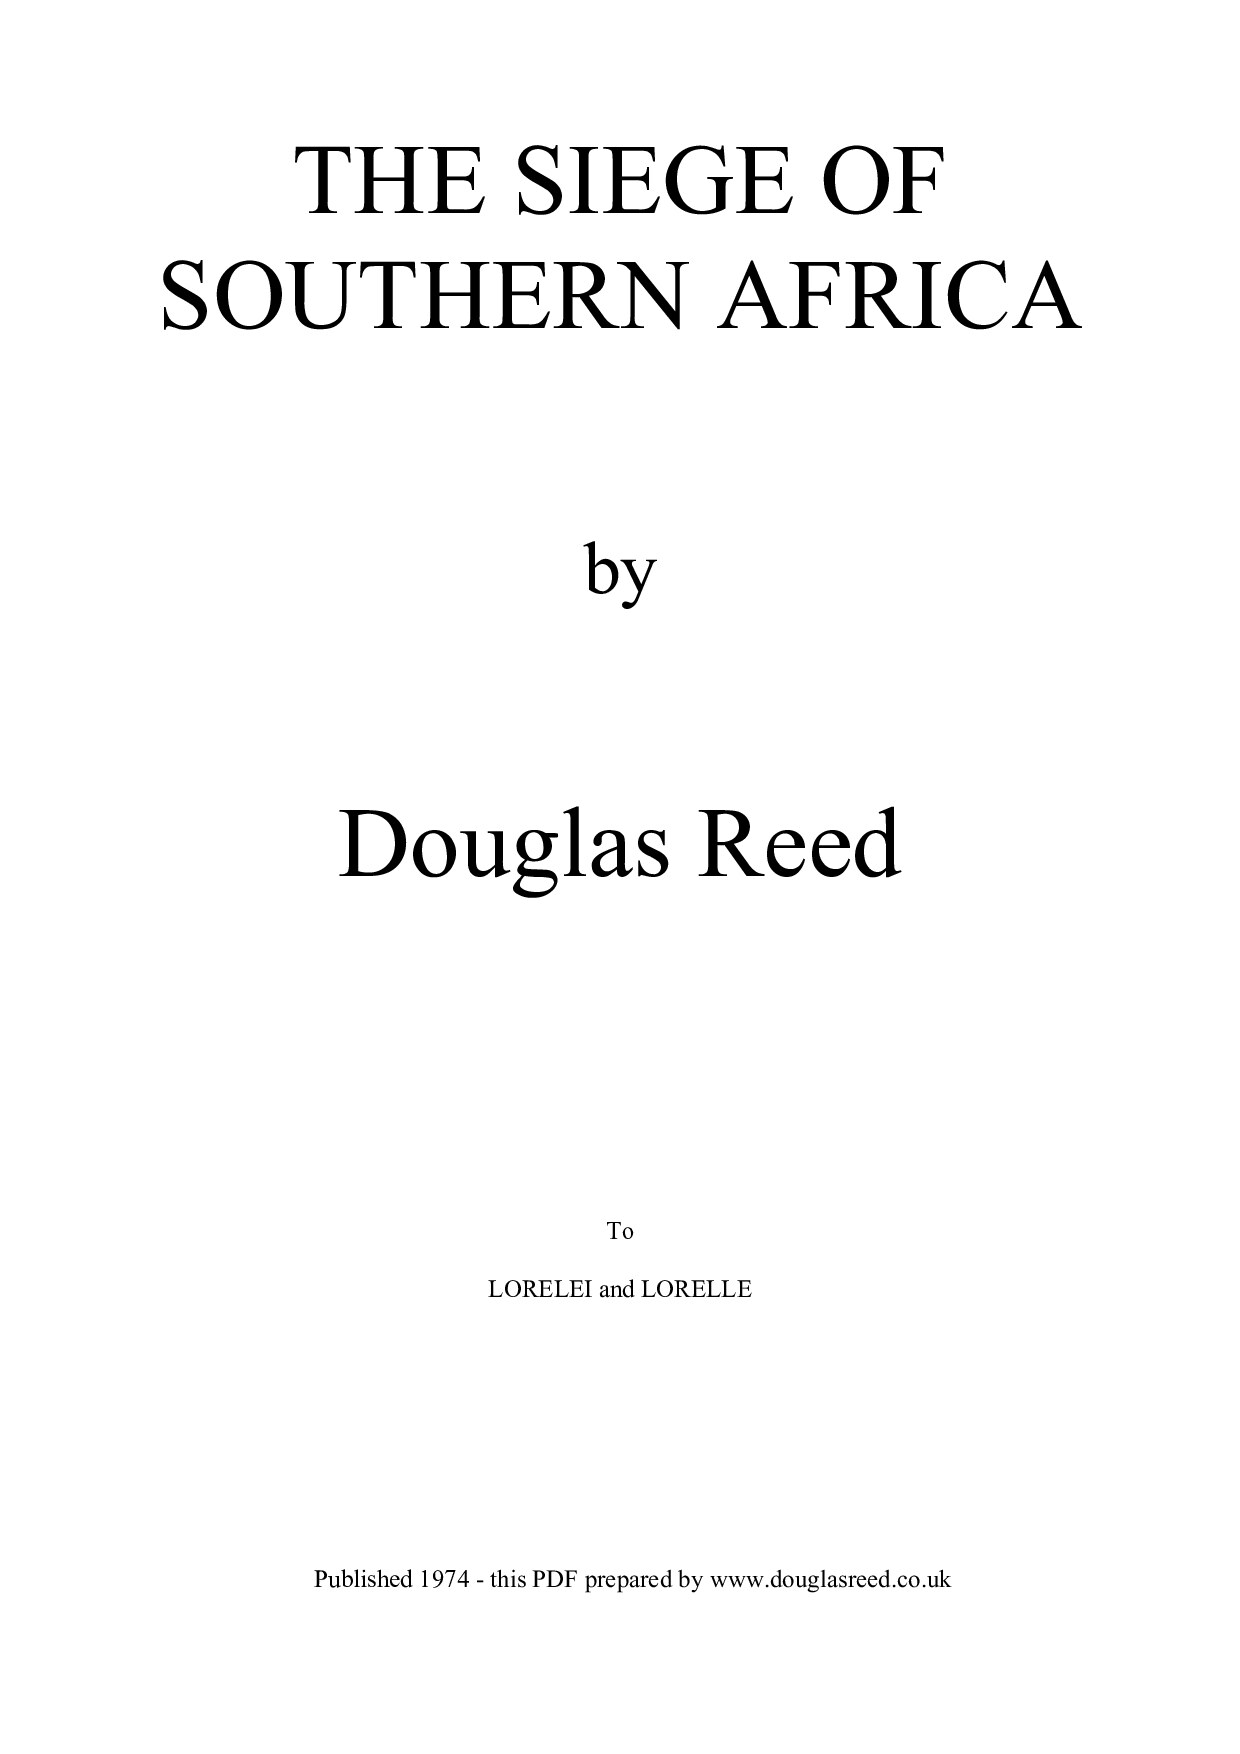 The Siege of Southern Africa